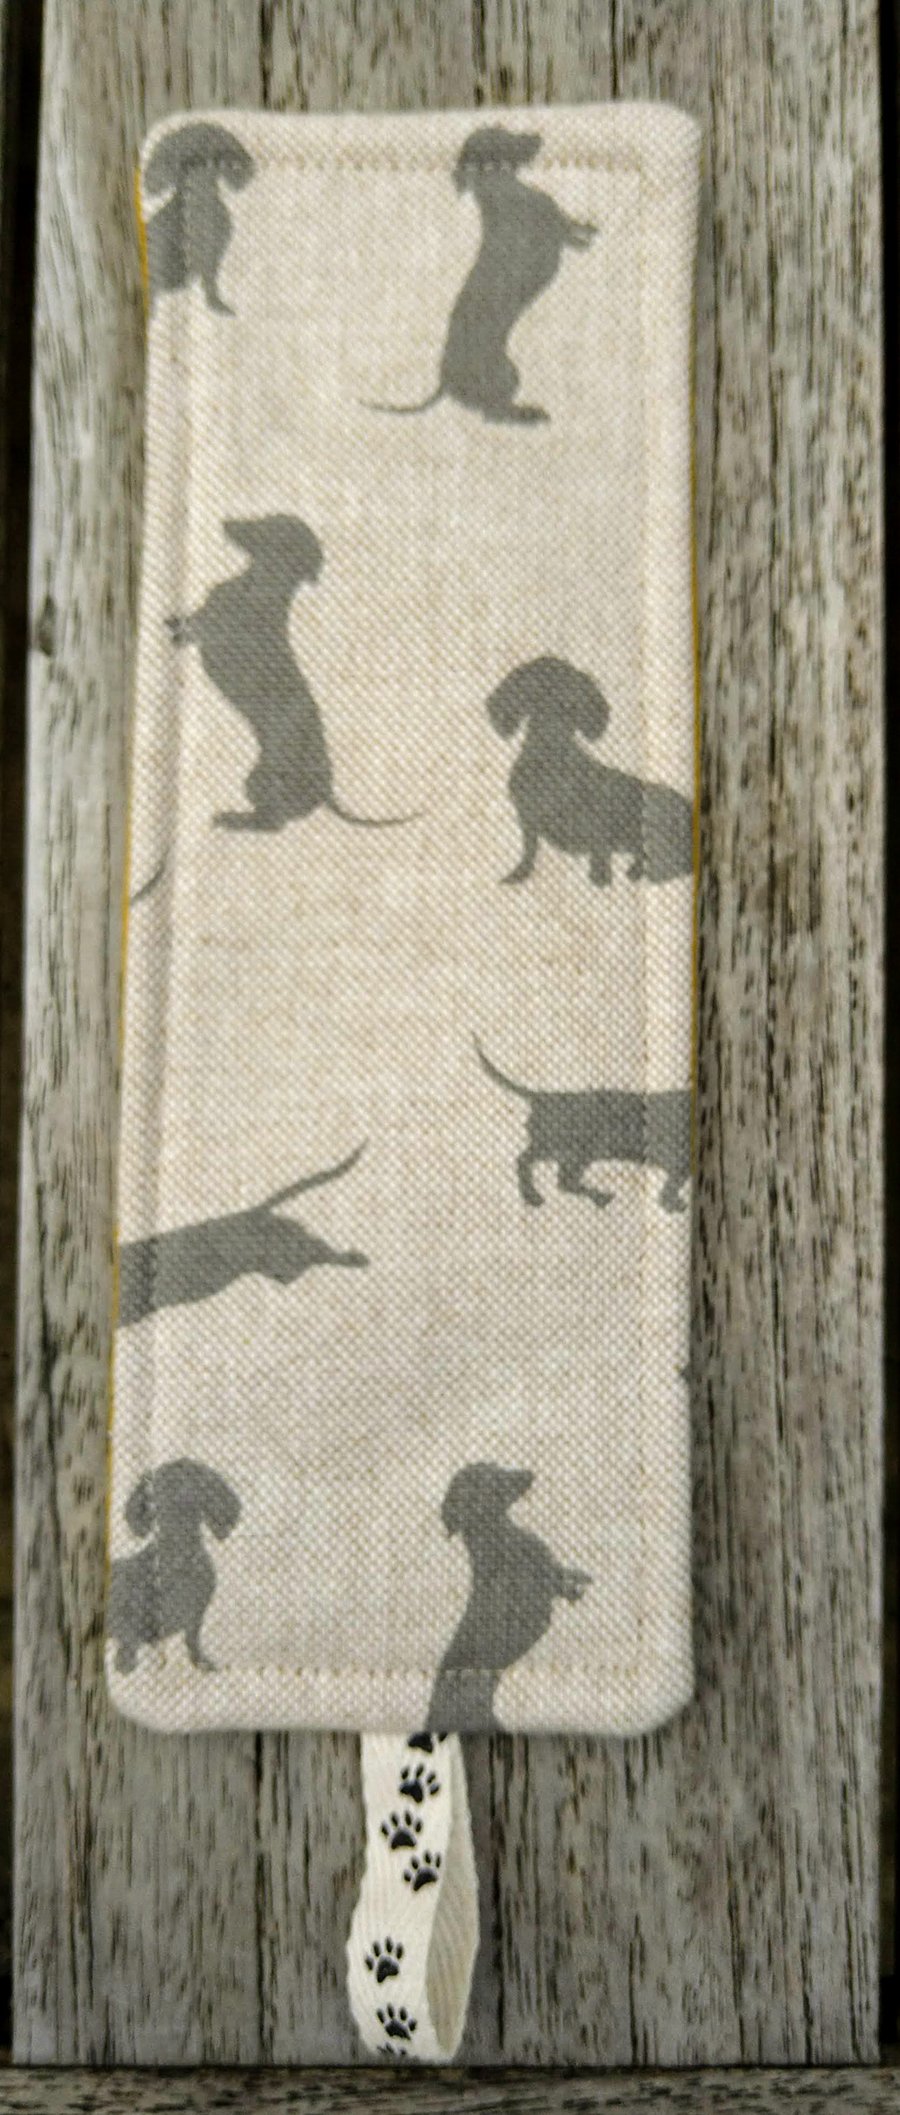 Bookmark with dachshunds 